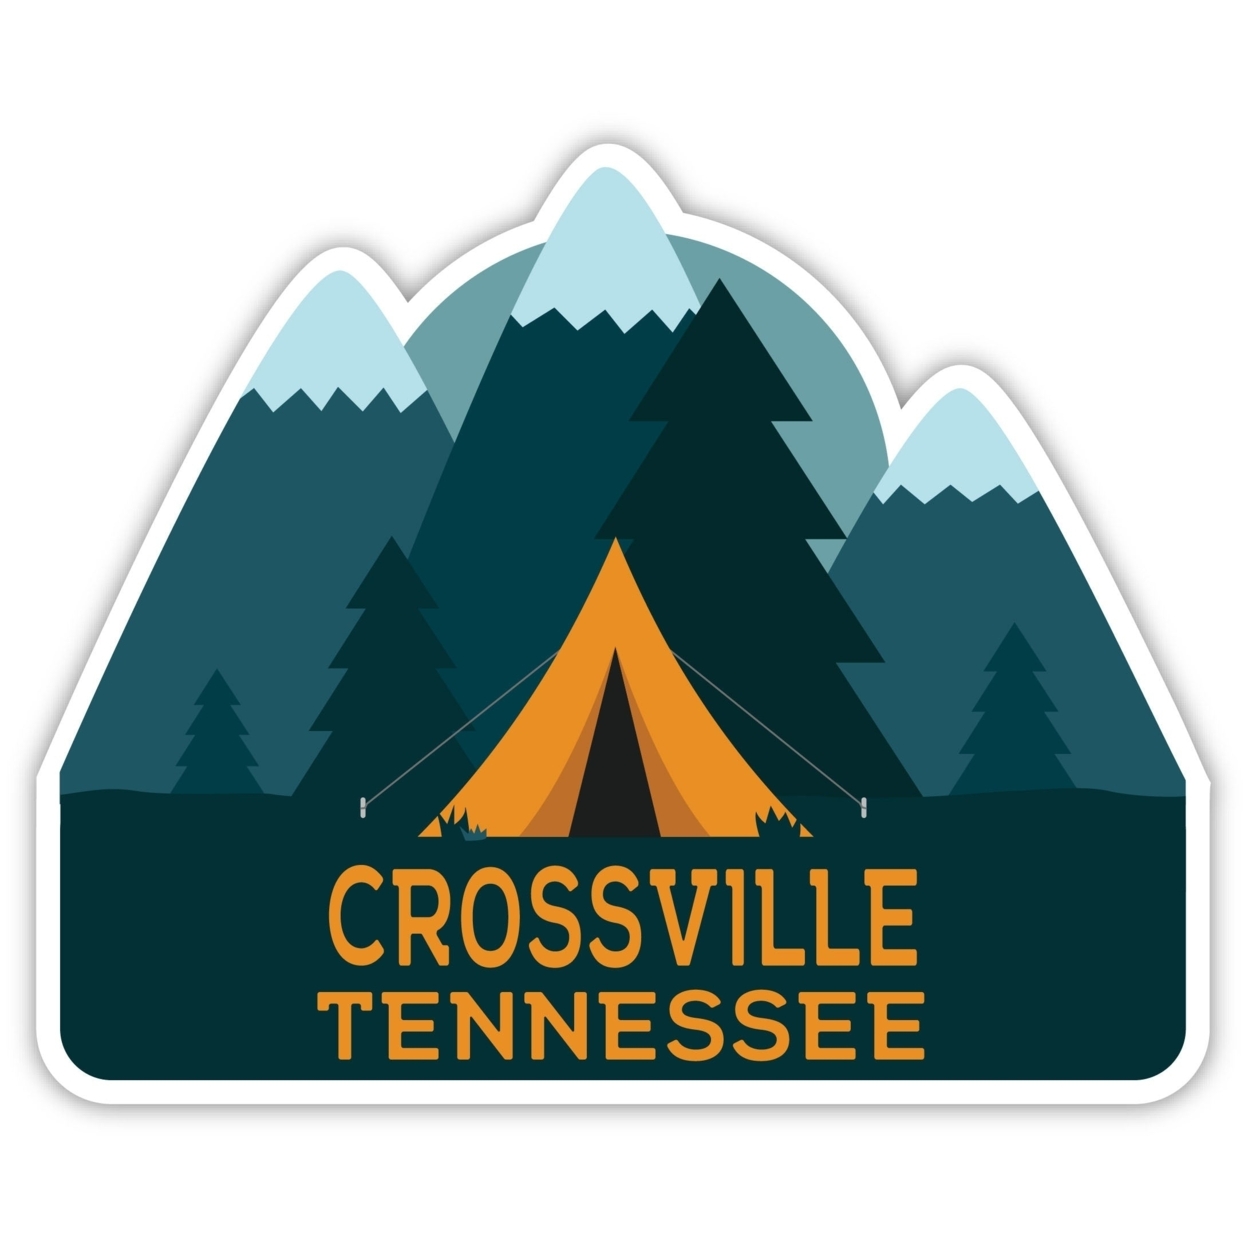 Crossville Tennessee Souvenir Decorative Stickers (Choose Theme And Size) - Single Unit, 10-Inch, Bear